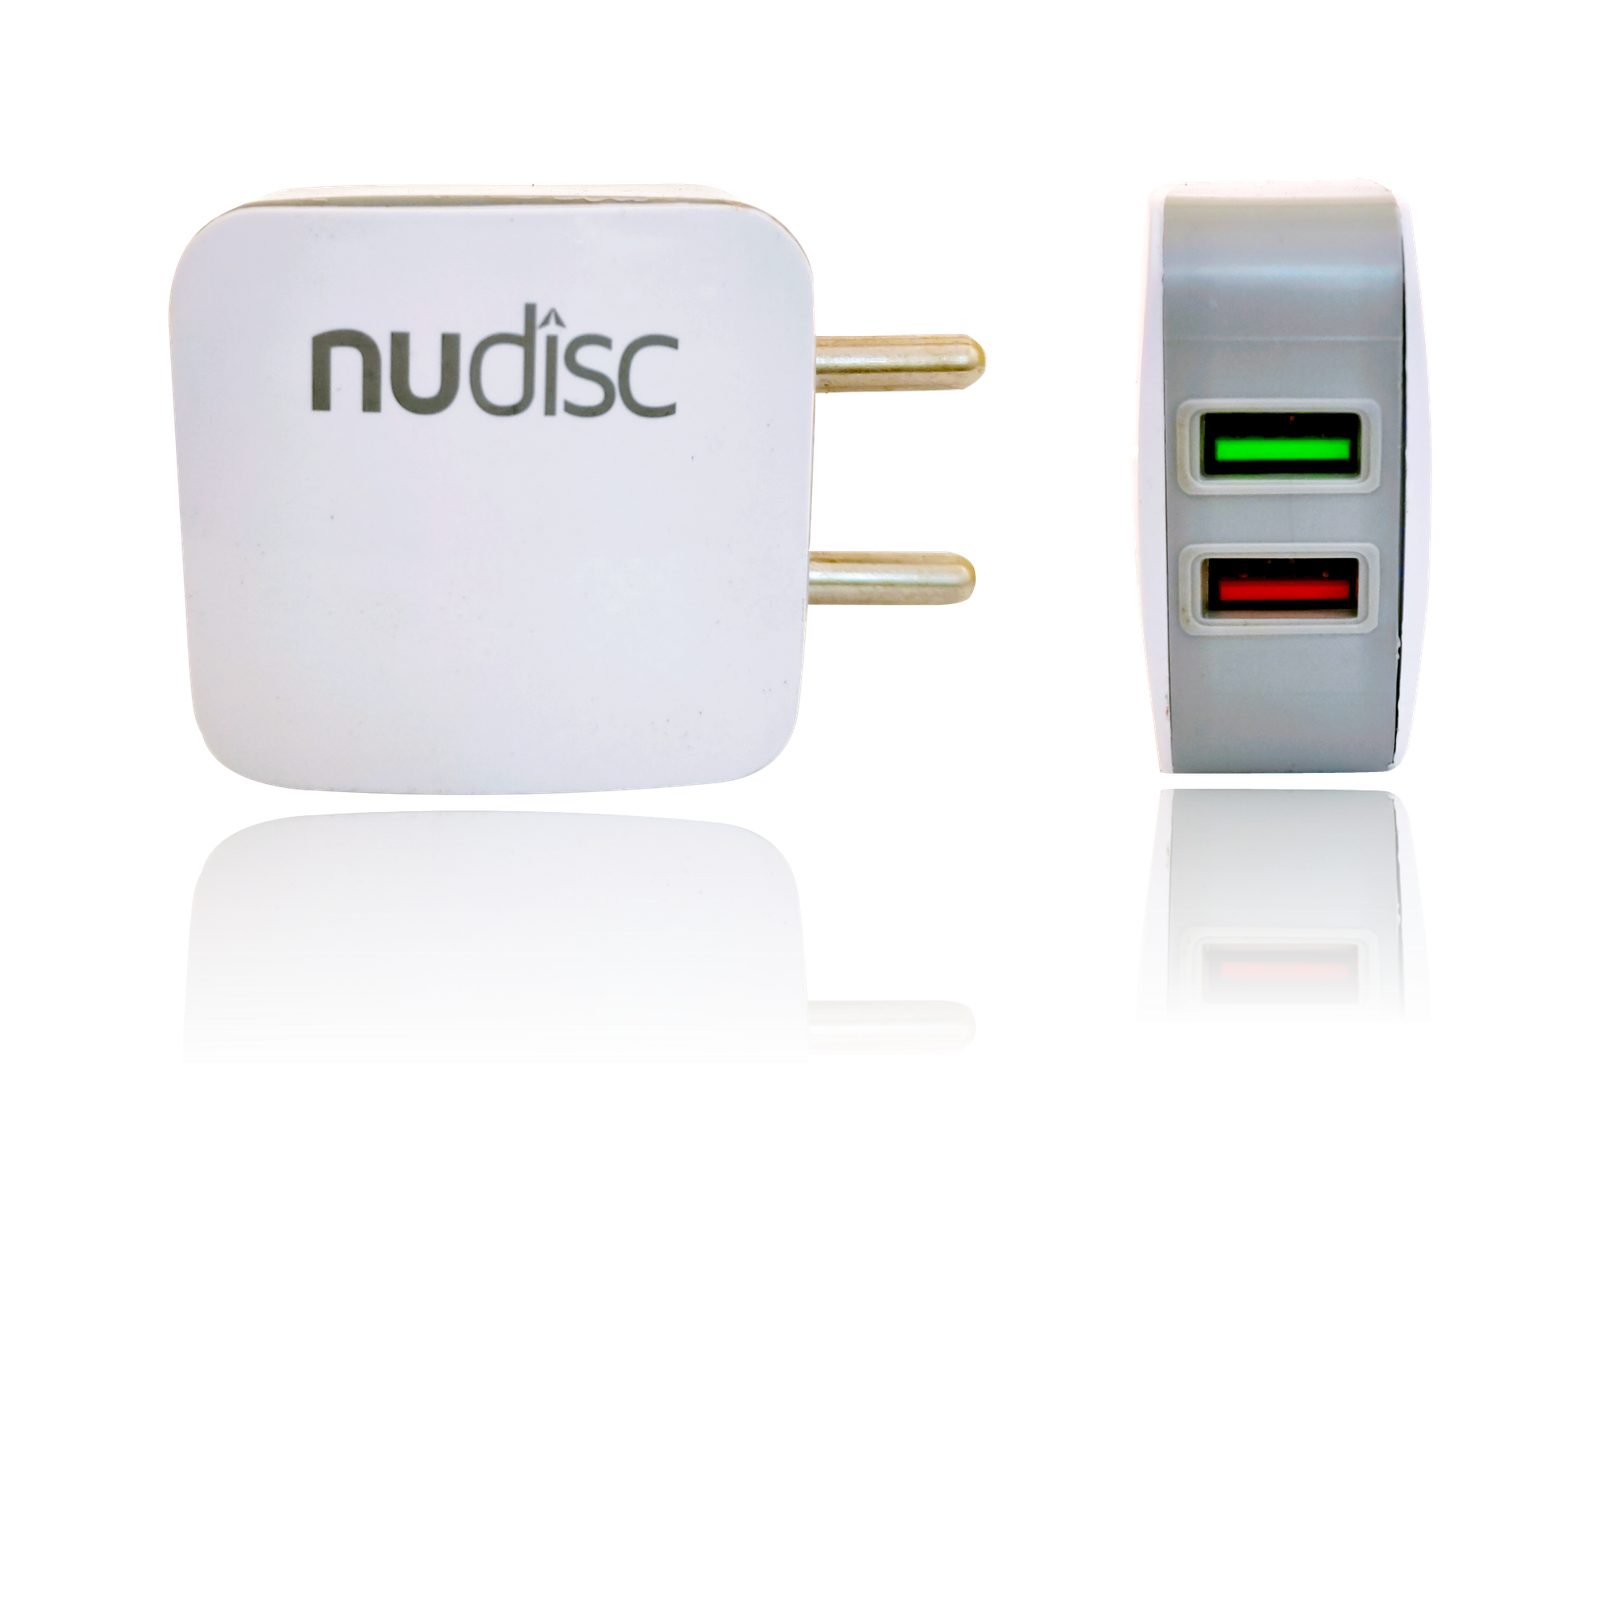 Nudisc CR 25 mobile charger